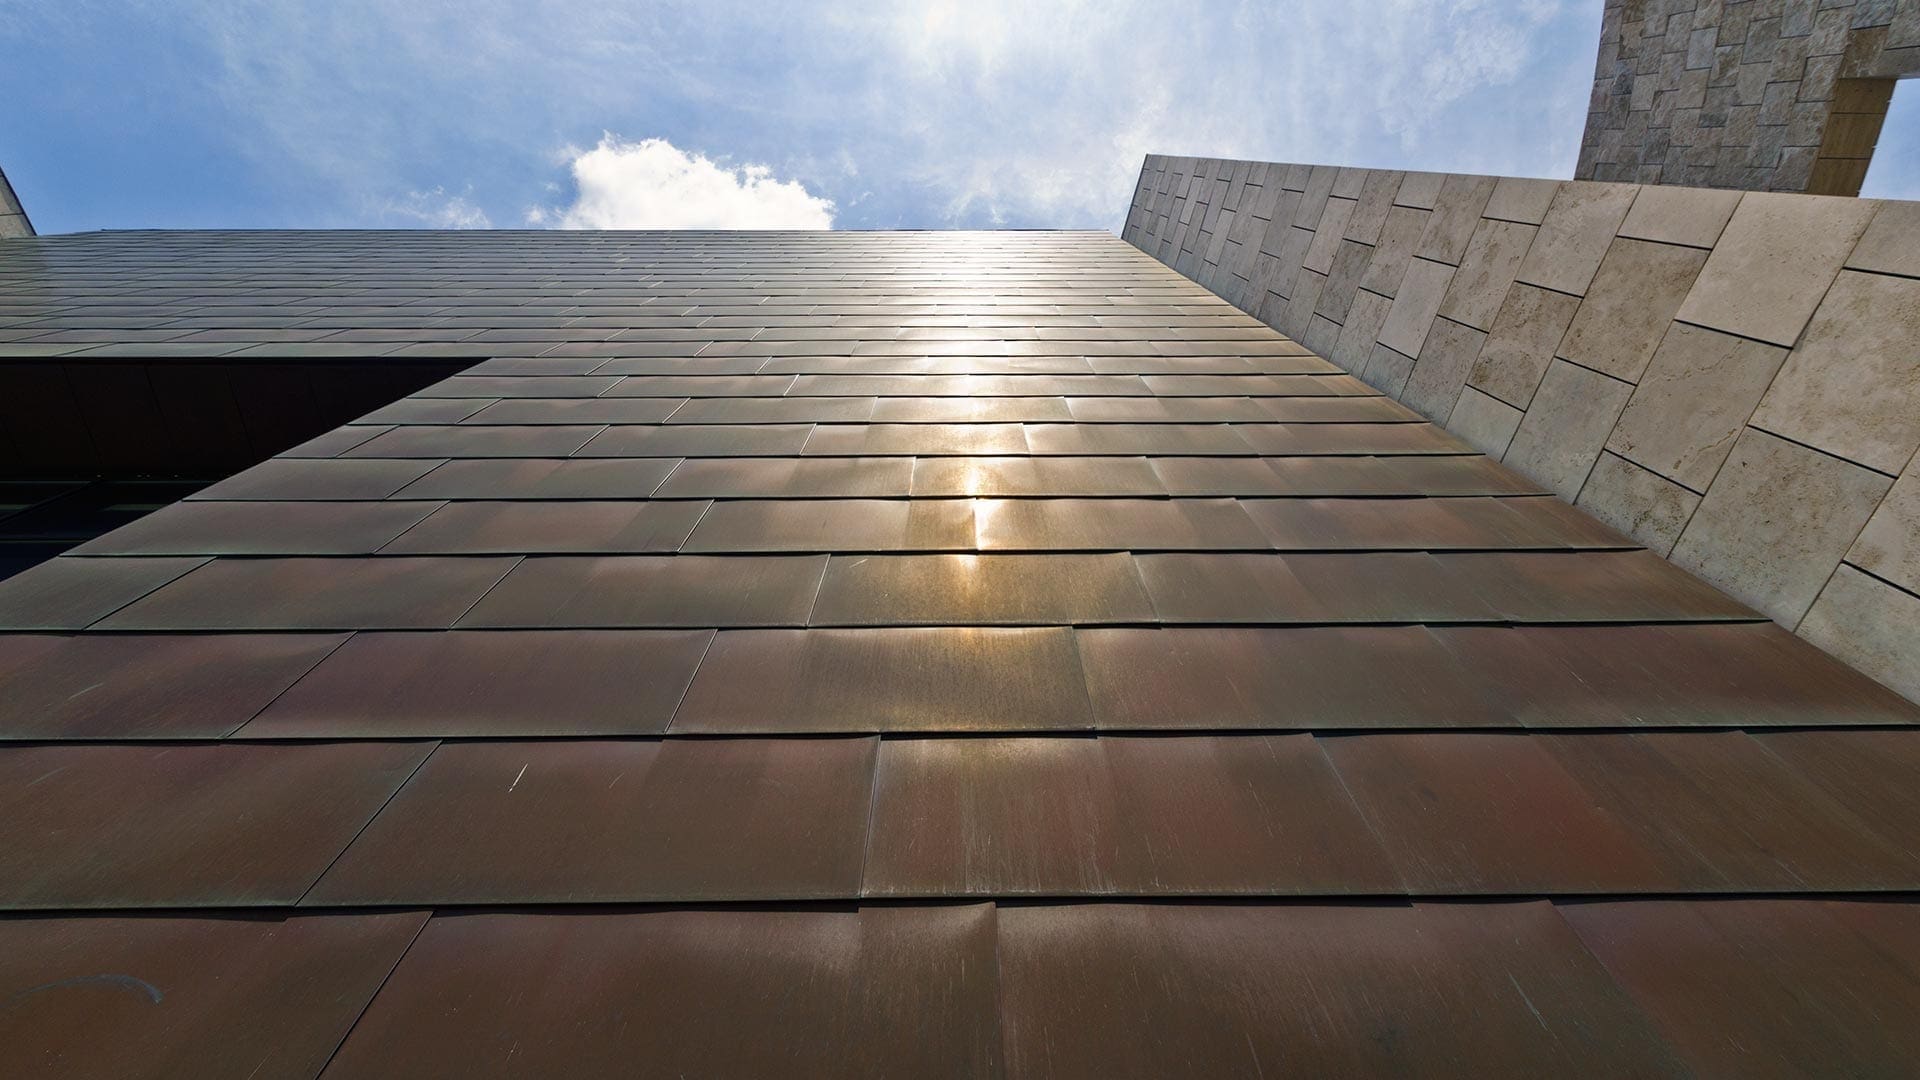 Upward view of the Freedom Center copper panels which have patinated to a dark red-brown.